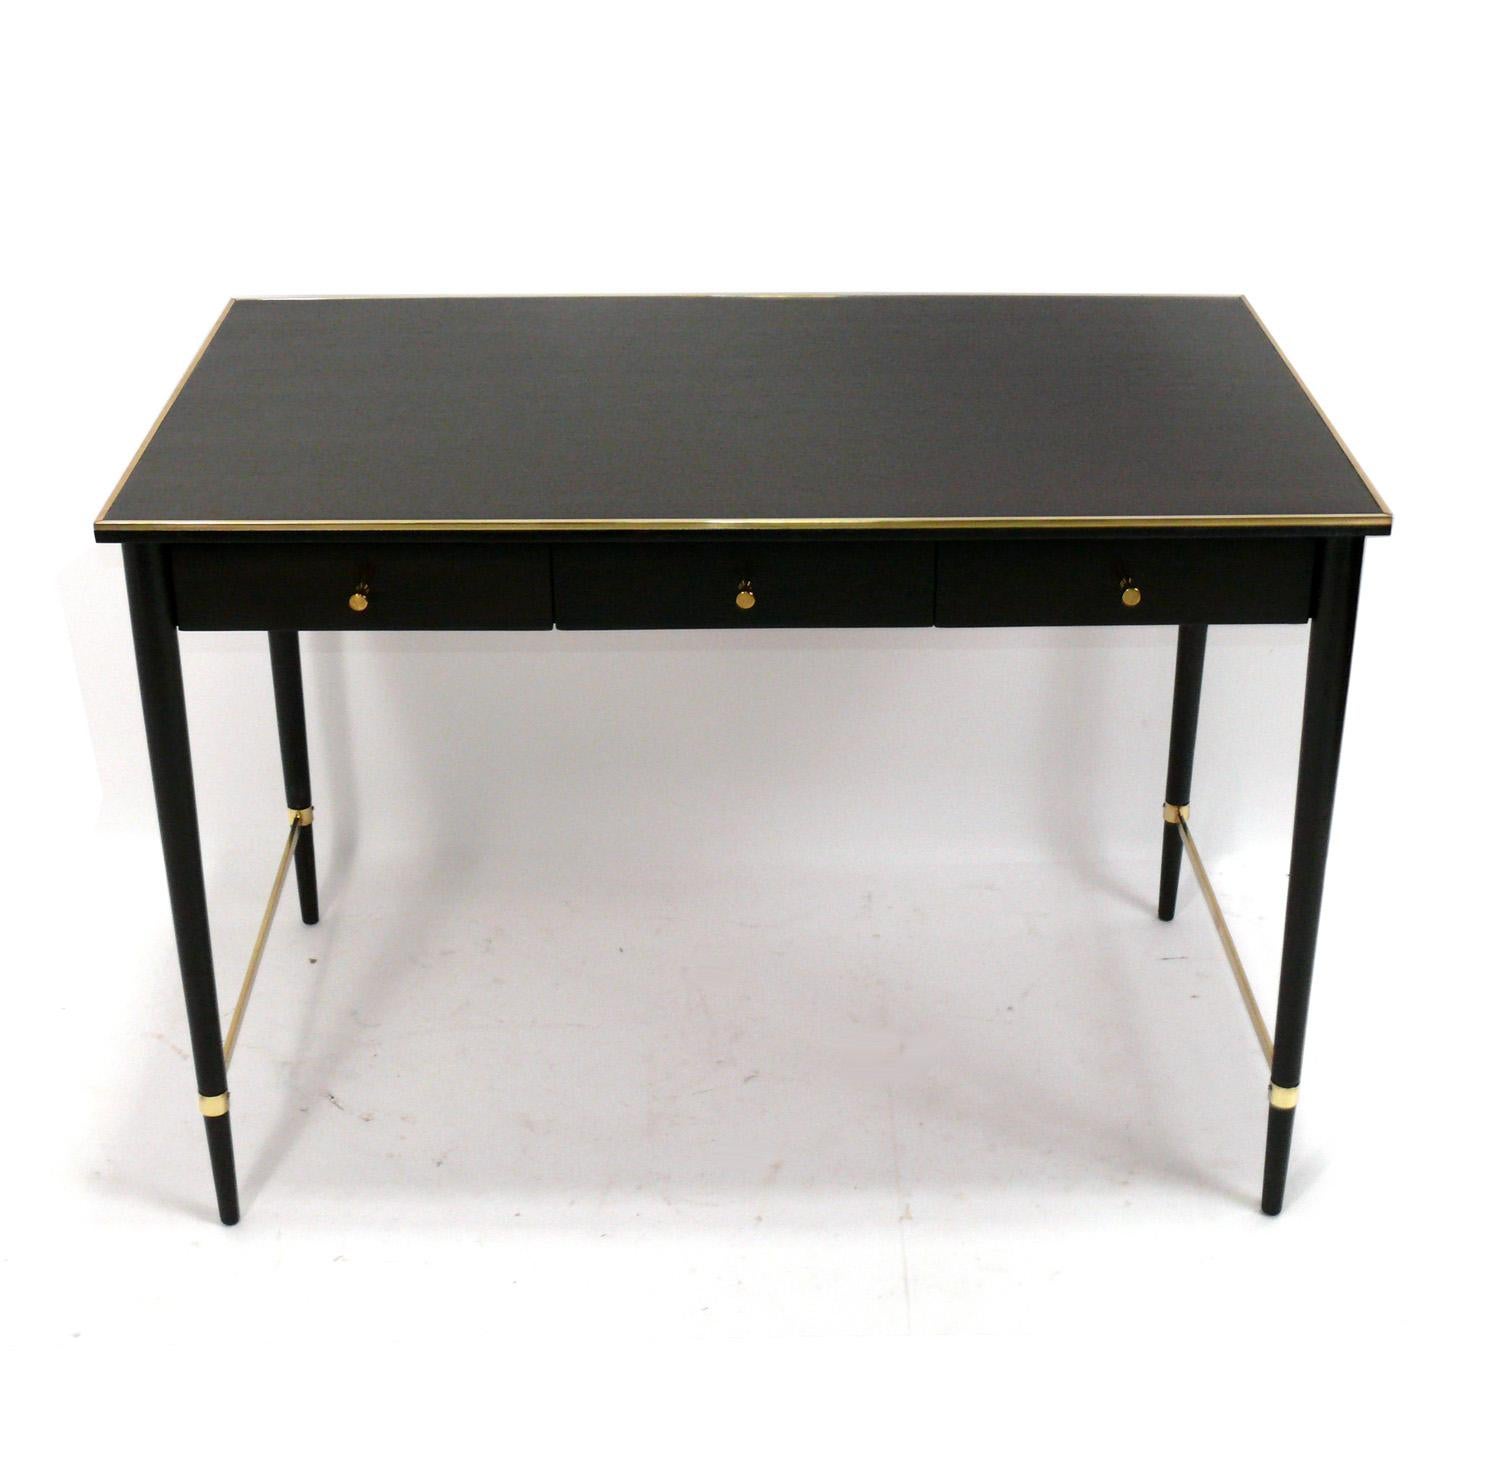 Elegant Mid Century Desk, designed by Paul McCobb for The Connoisseur Collection by H. Sacks, American, circa 1950s. It has recently been refinished and the brass elements have been hand polished and lacquered. It is a versatile size and can be used